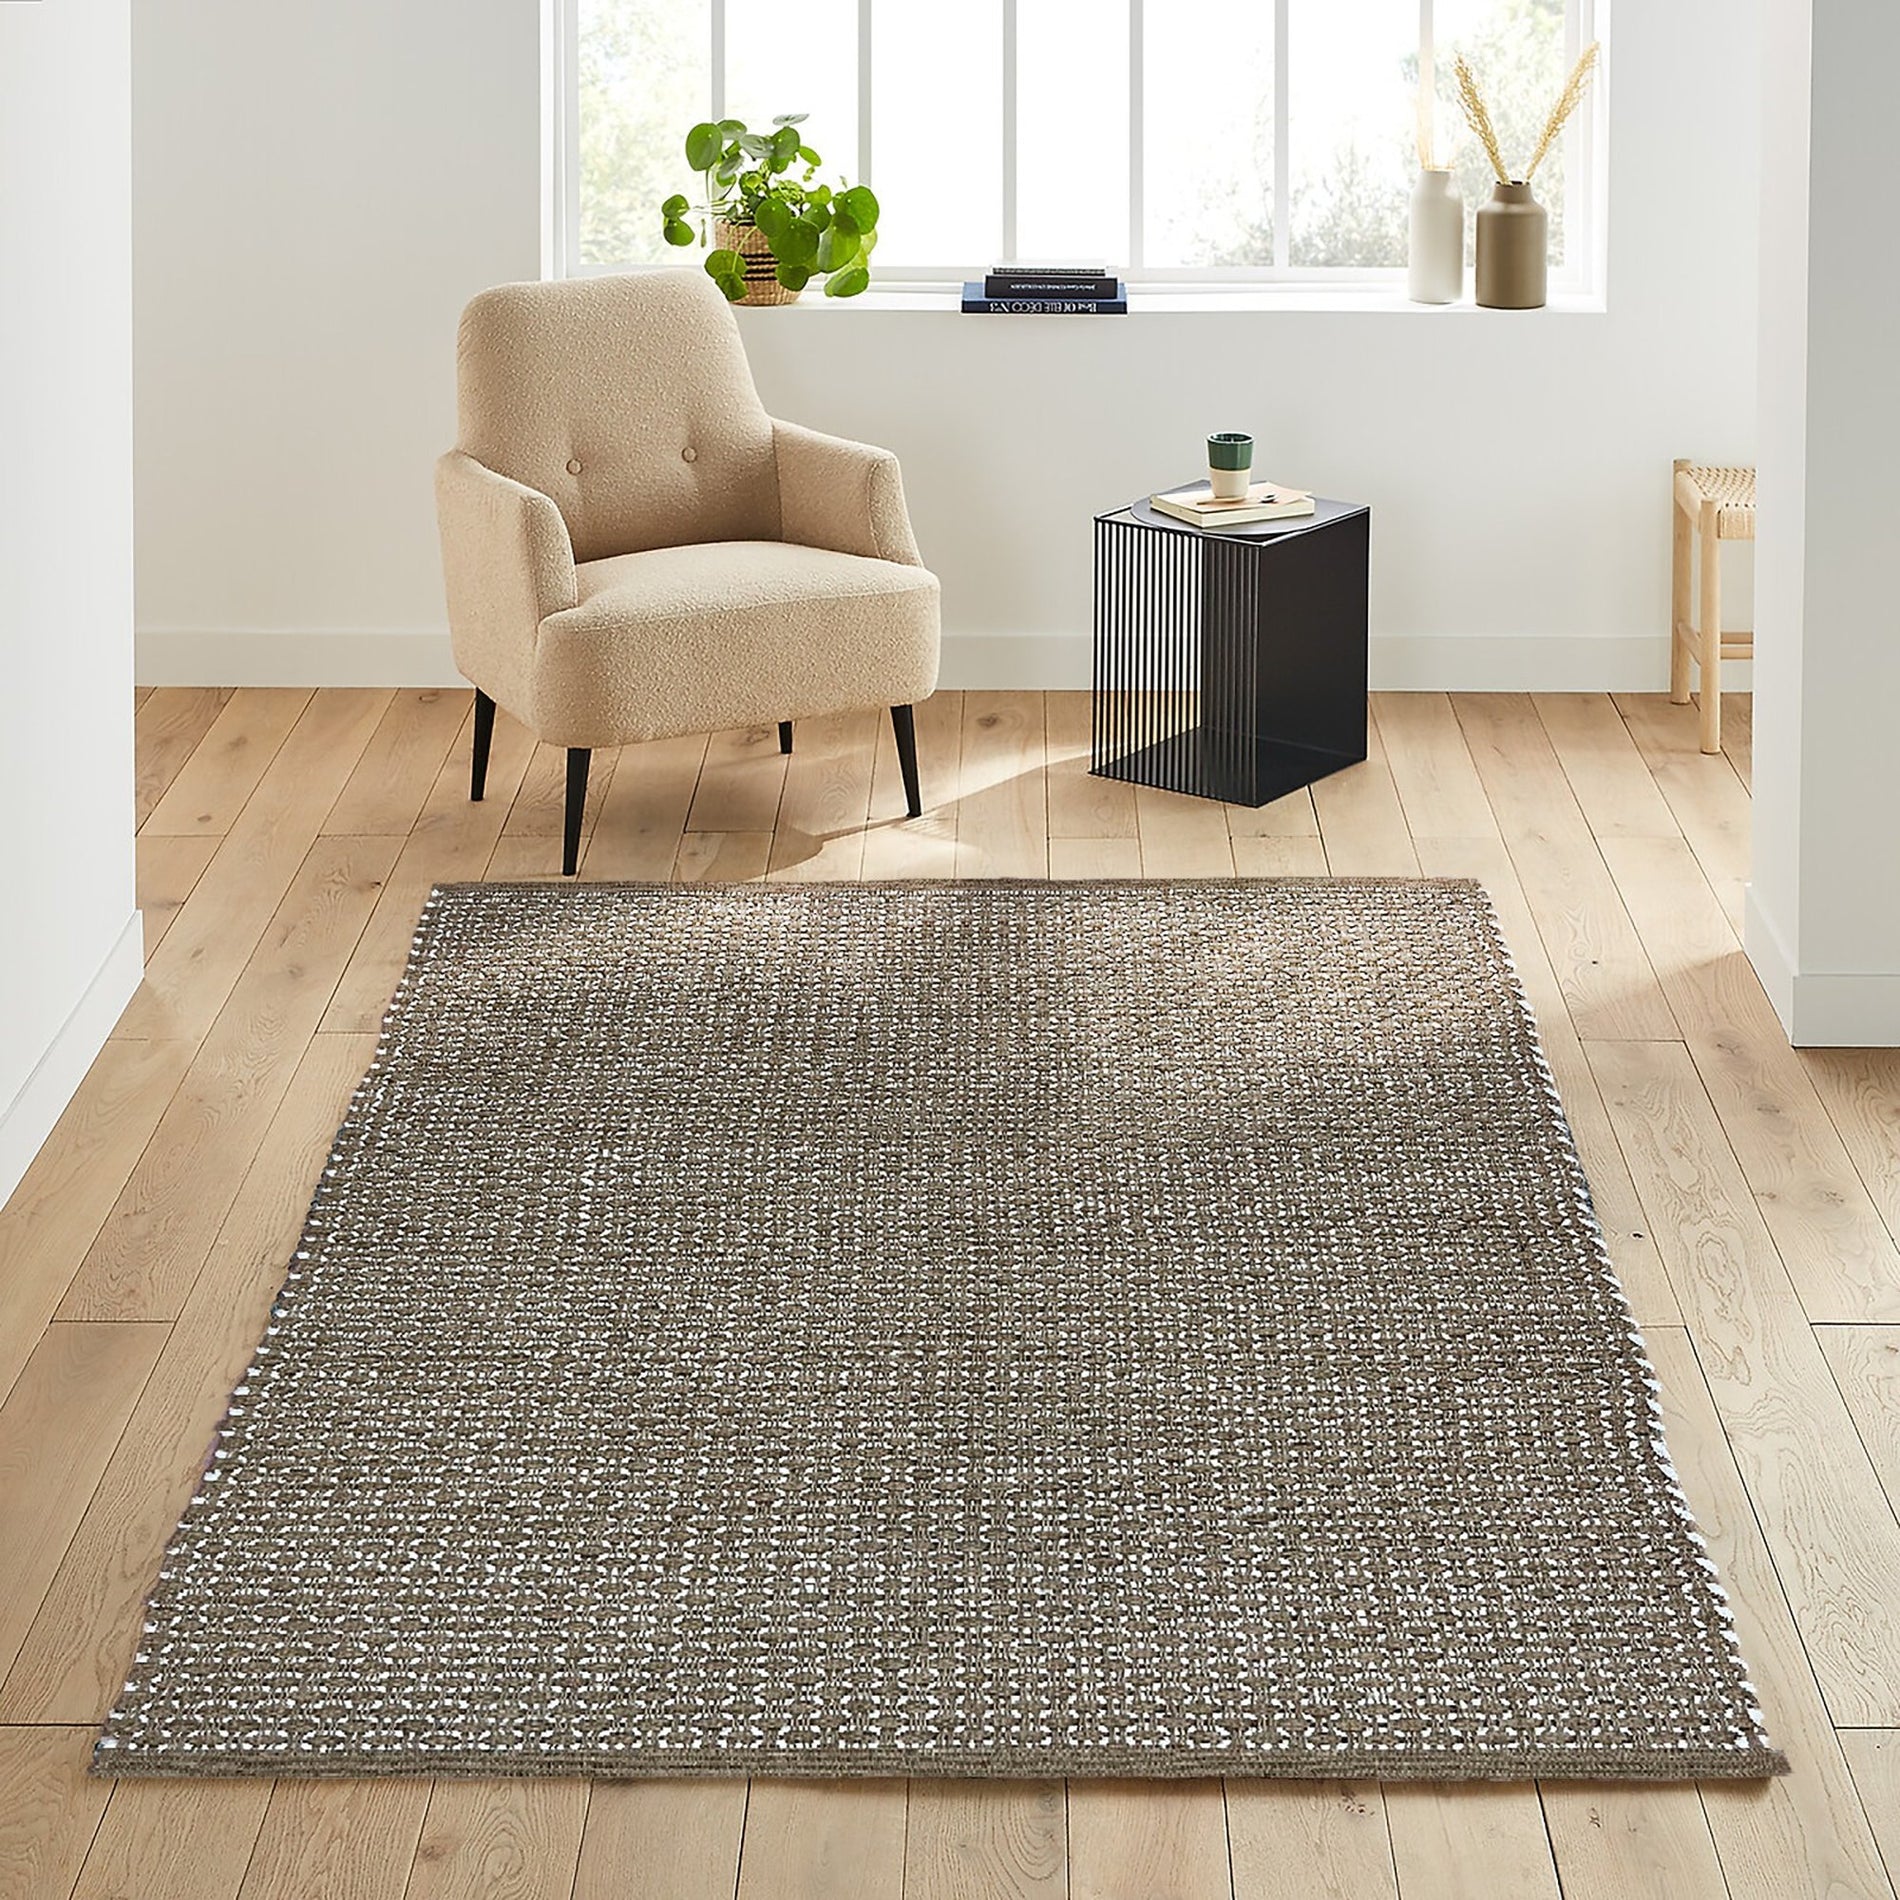 The Innovation and Benefits of a Washable Jute Rug: A Game Changer for Your Home!